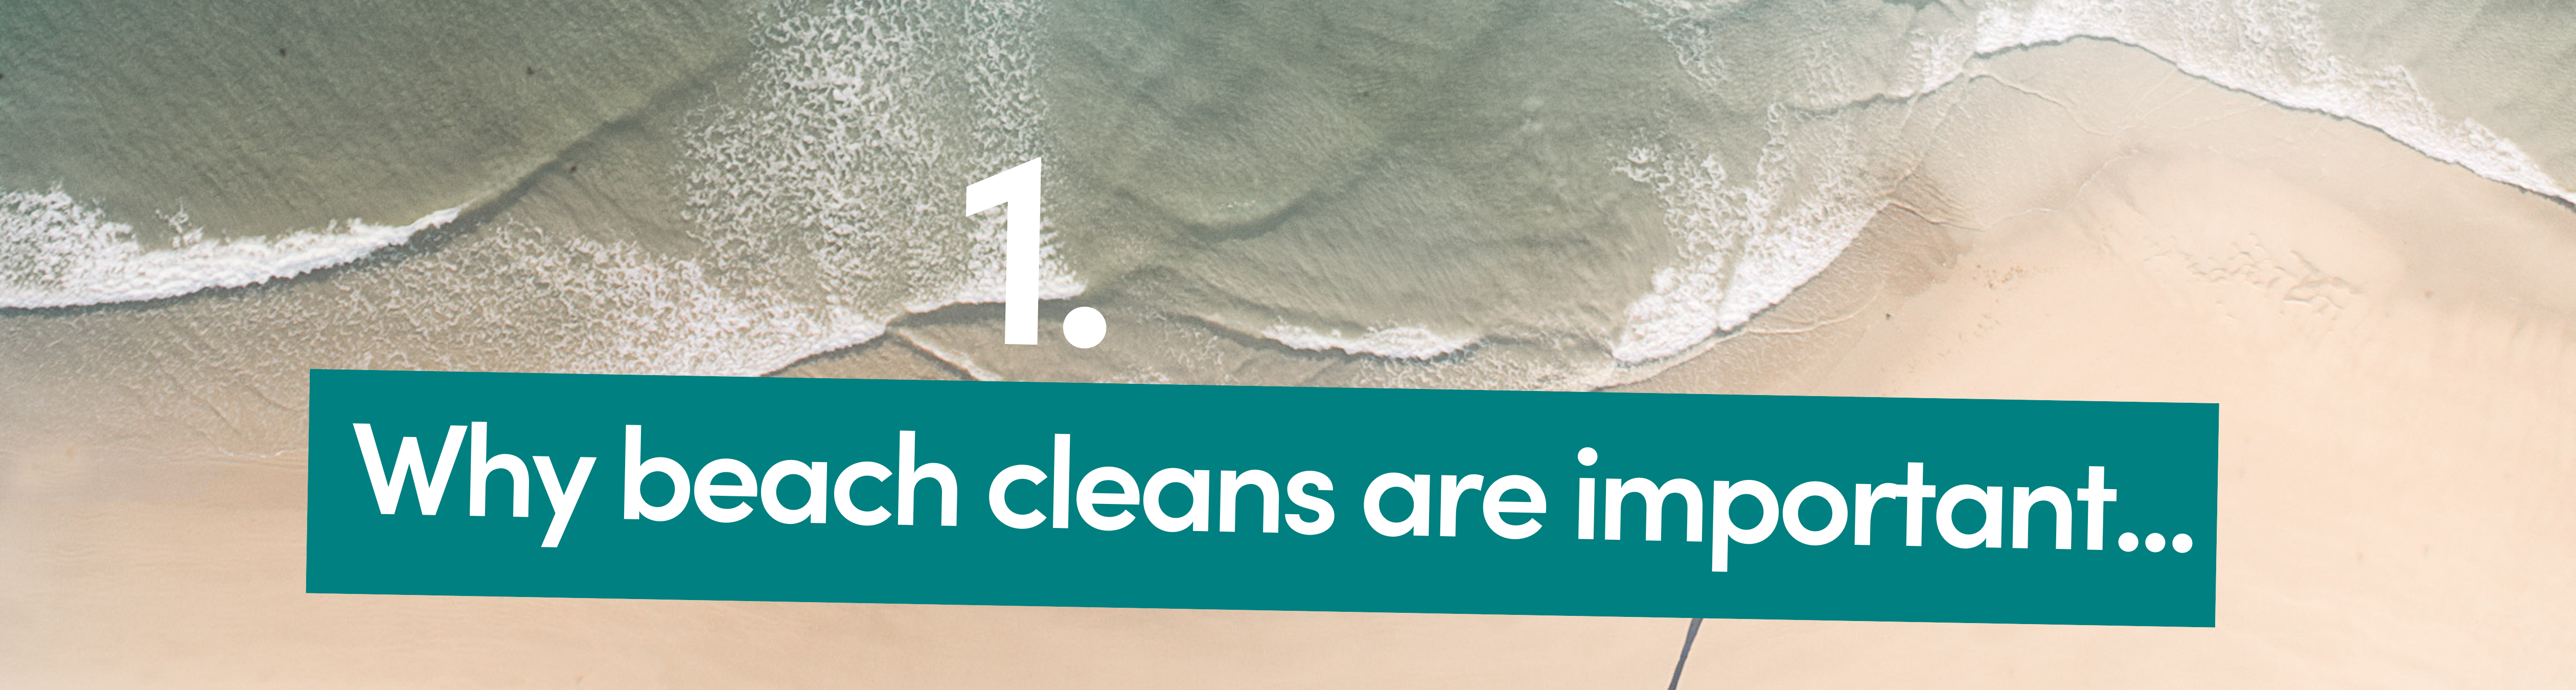 question 1 why beach cleans are important